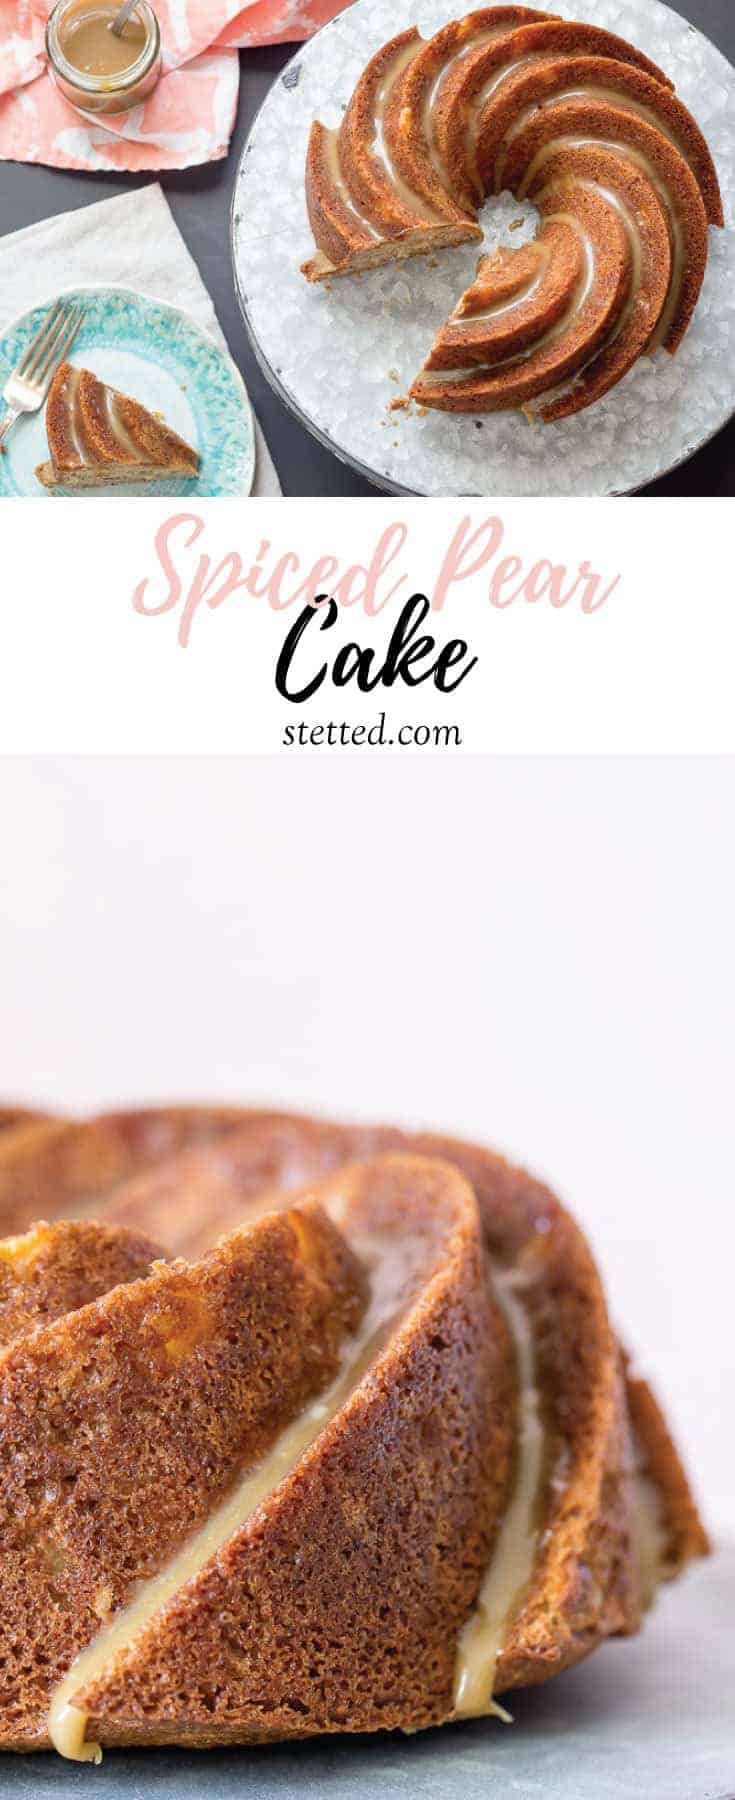 Defying Gravity { Recipe: Spiced Pear Cake } - stetted